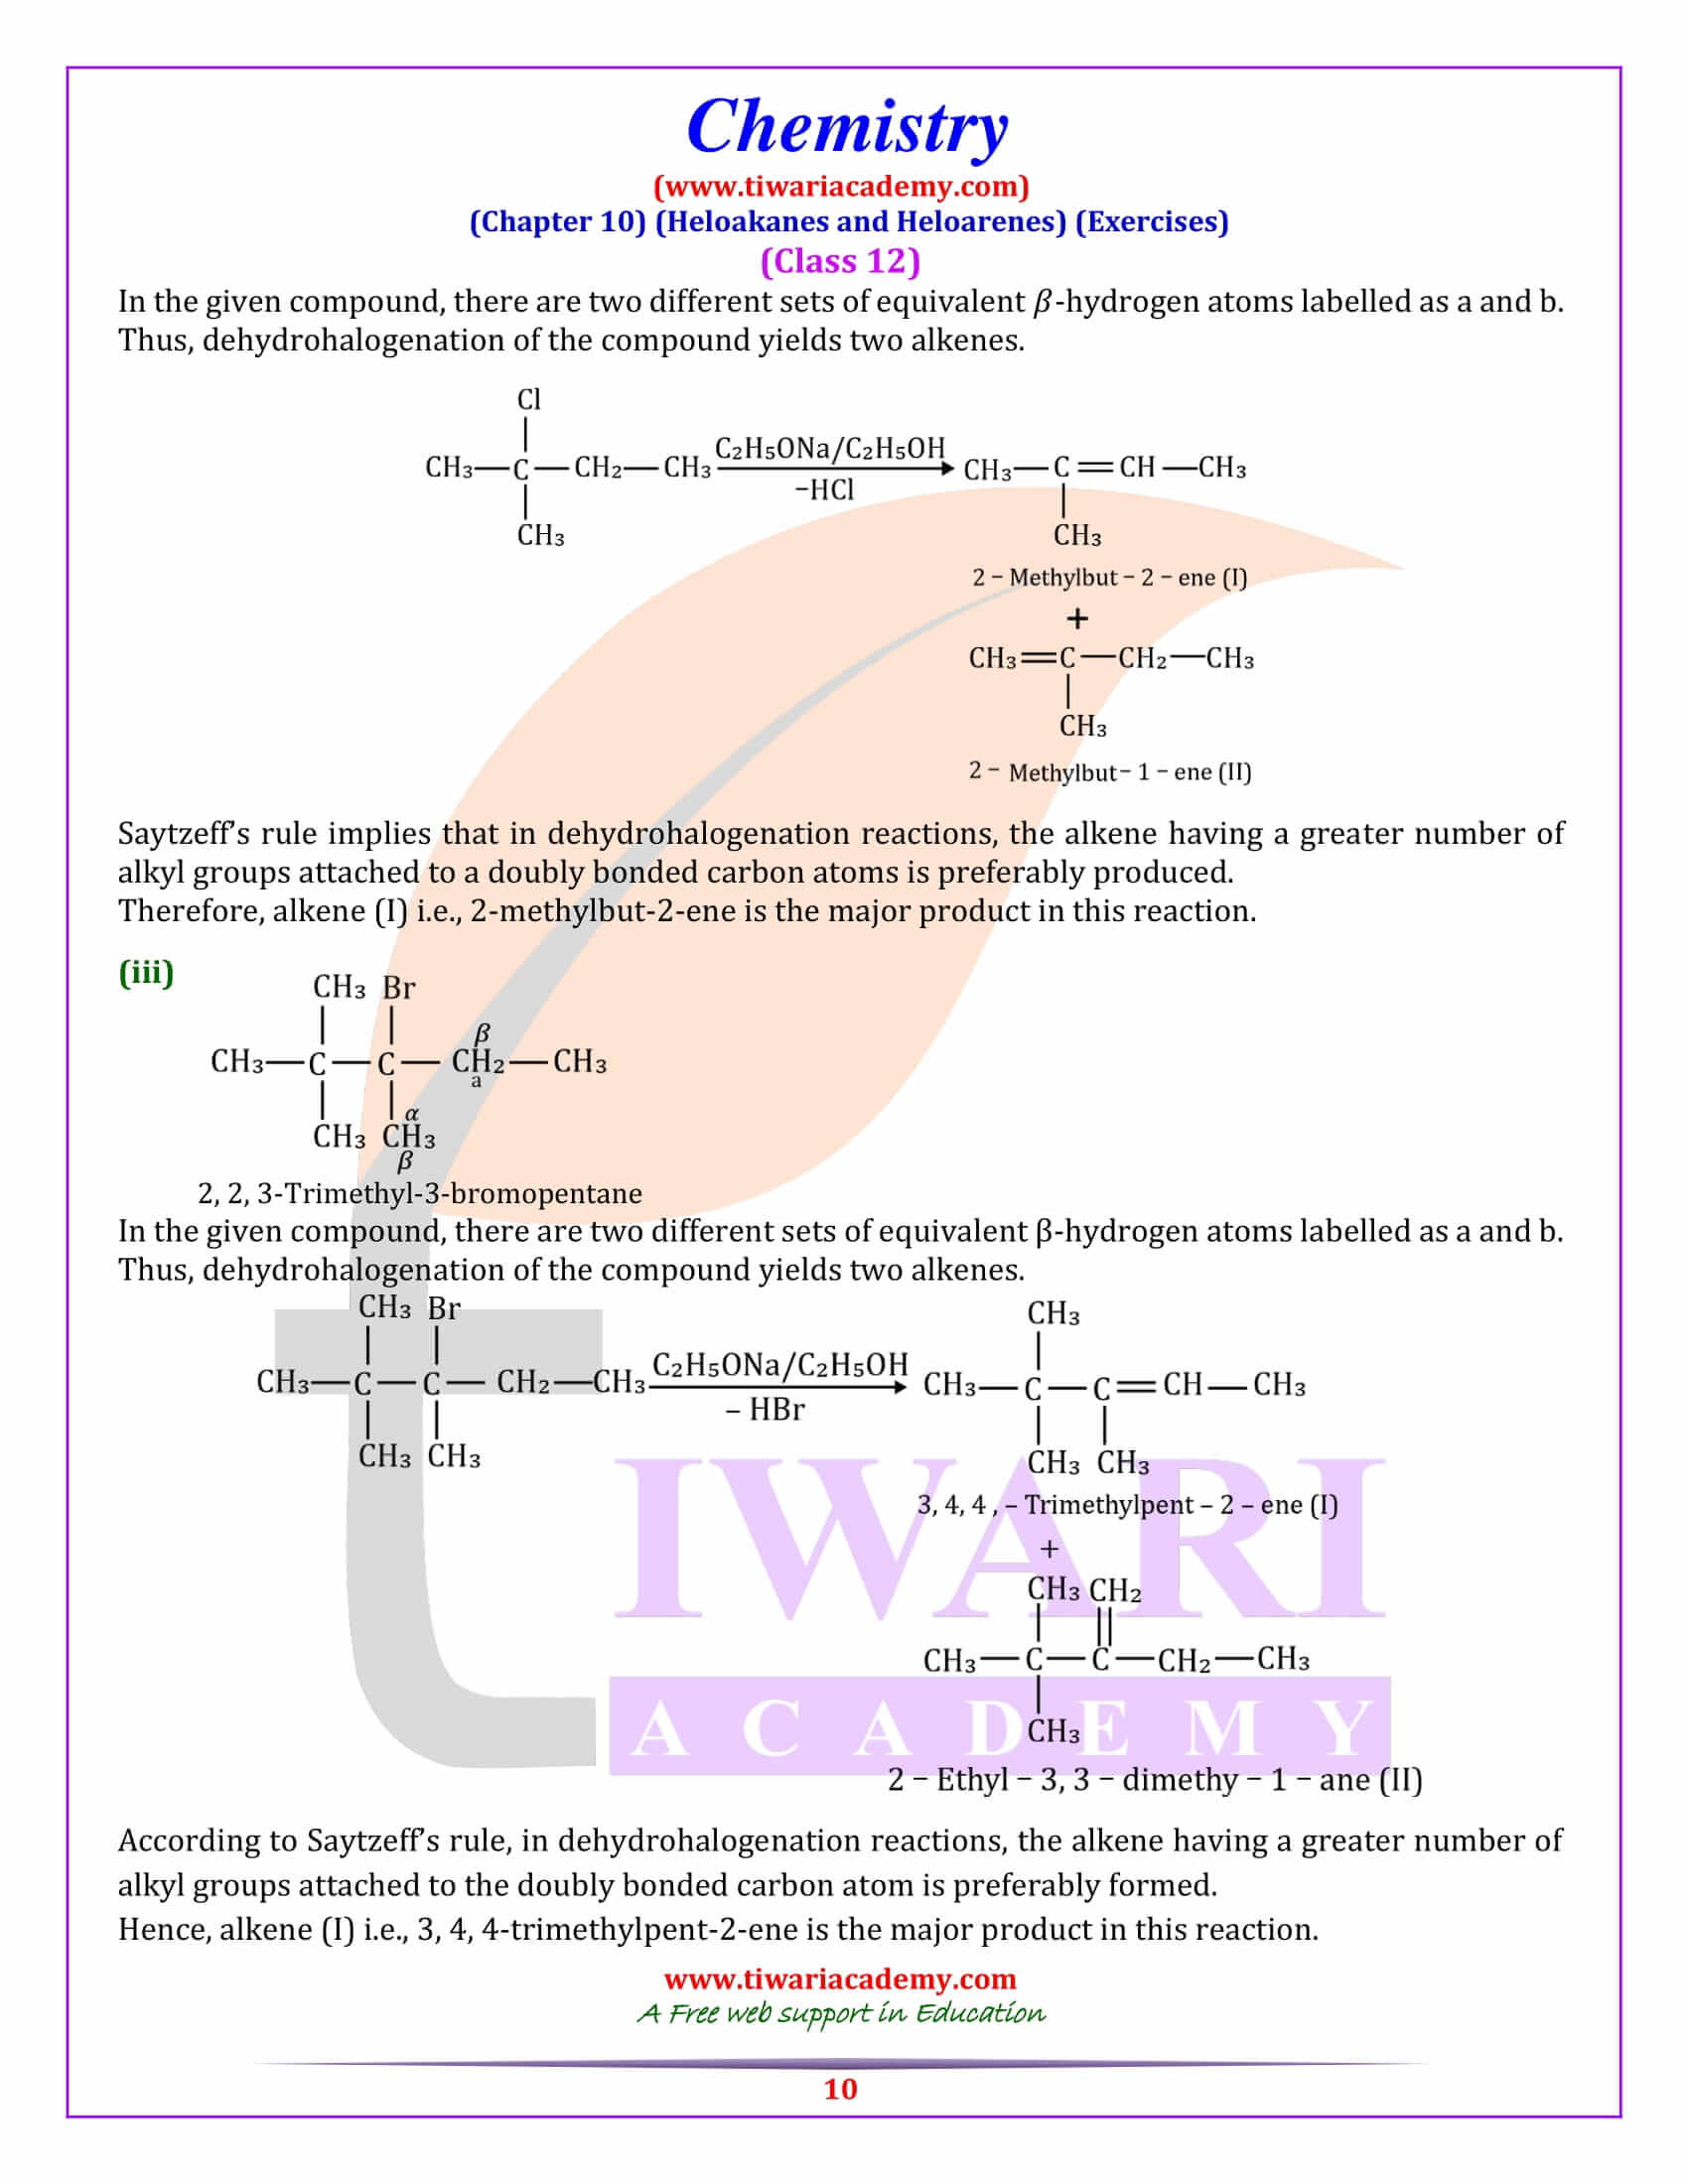 NCERT Solutions for Class 12 Chemistry Chapter 10 updated format